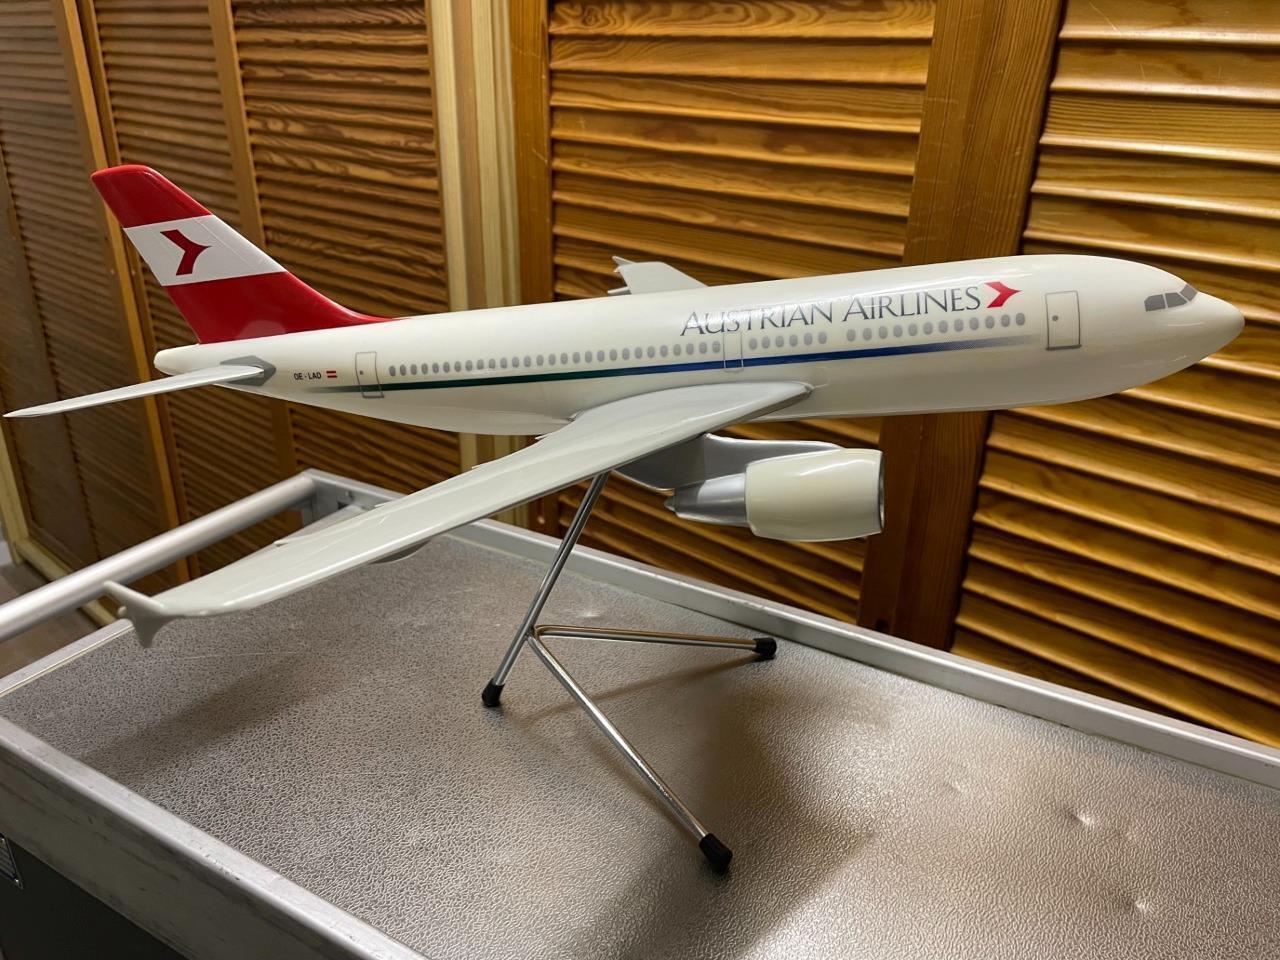 1/100 scale Austrian Airlines Airbus A310-300 vintage